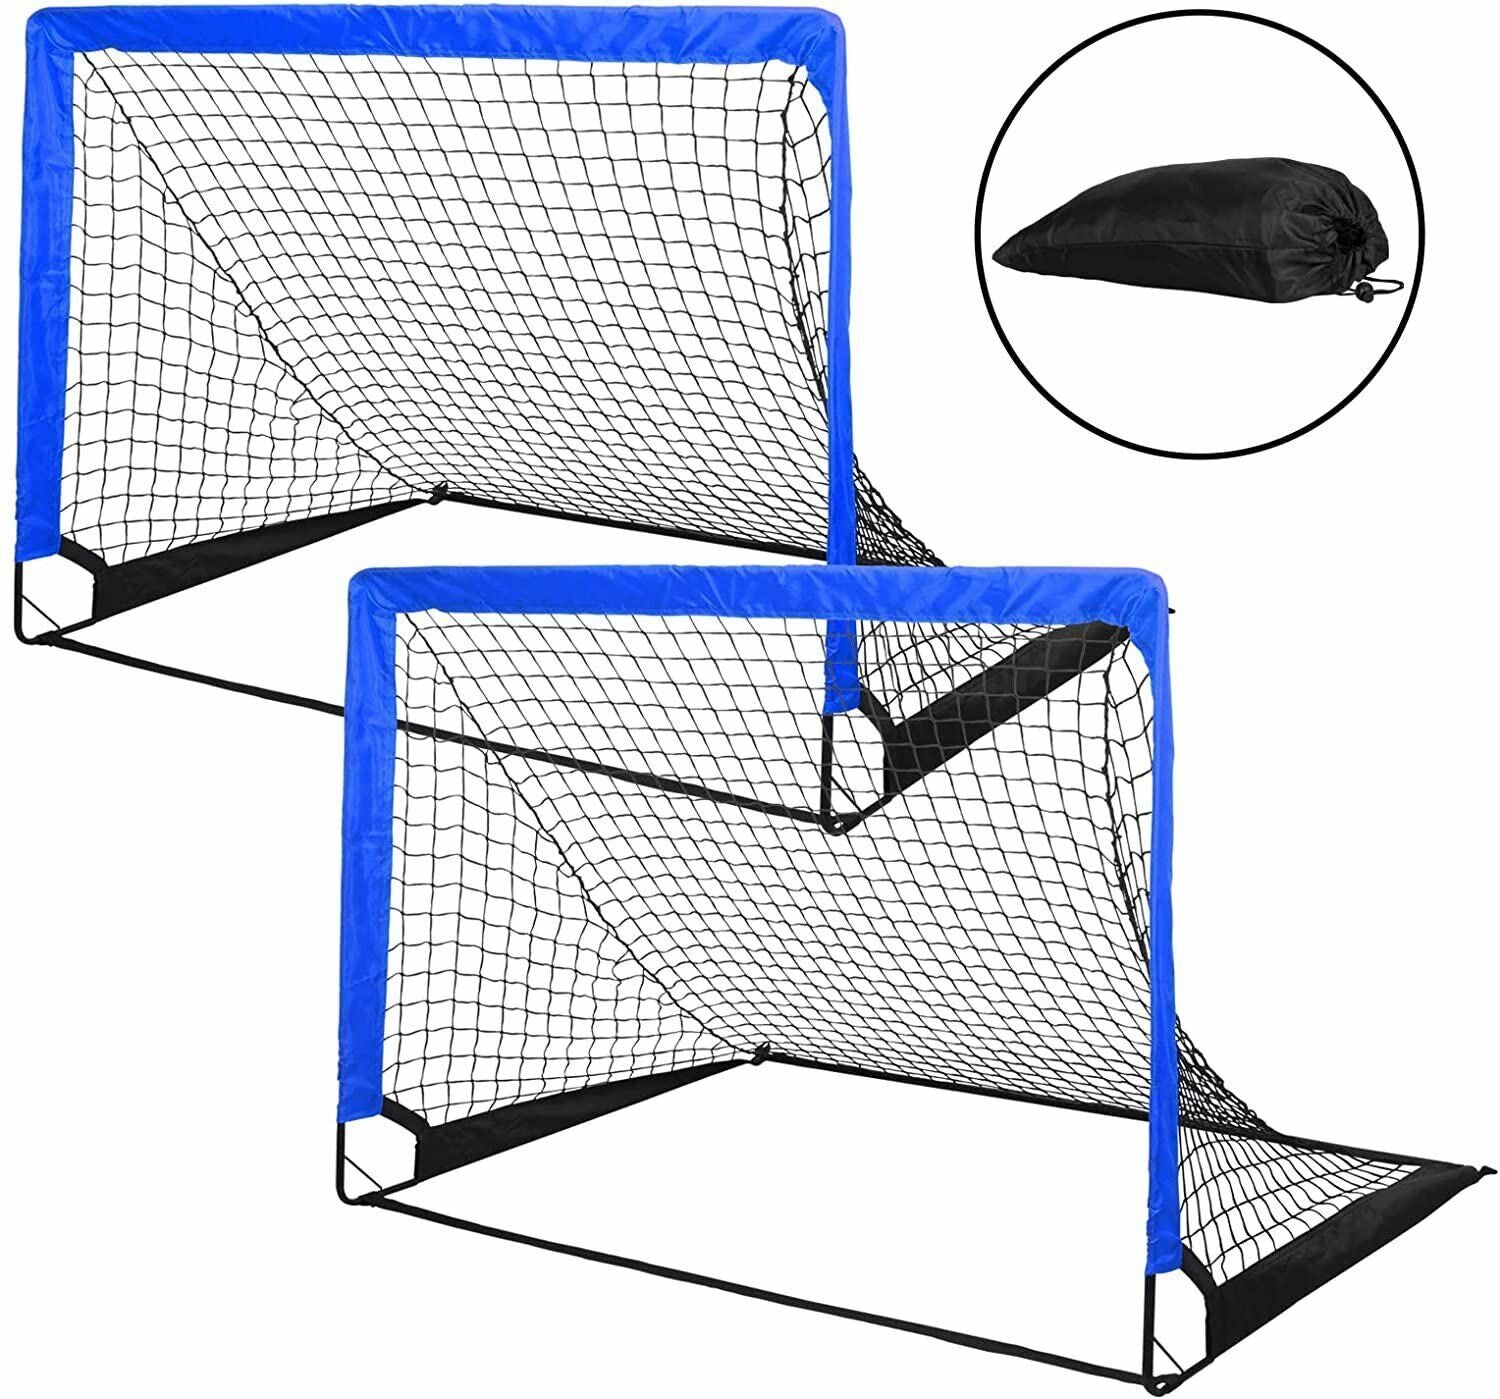 Simple Deluxe 4‘x3’ Portable Soccer Goal, Pop Up Folding Soccer Net Comes with 2 Oxford Cloth Bags and 8 Stakes, Great for Training for Backyard - Tonkn